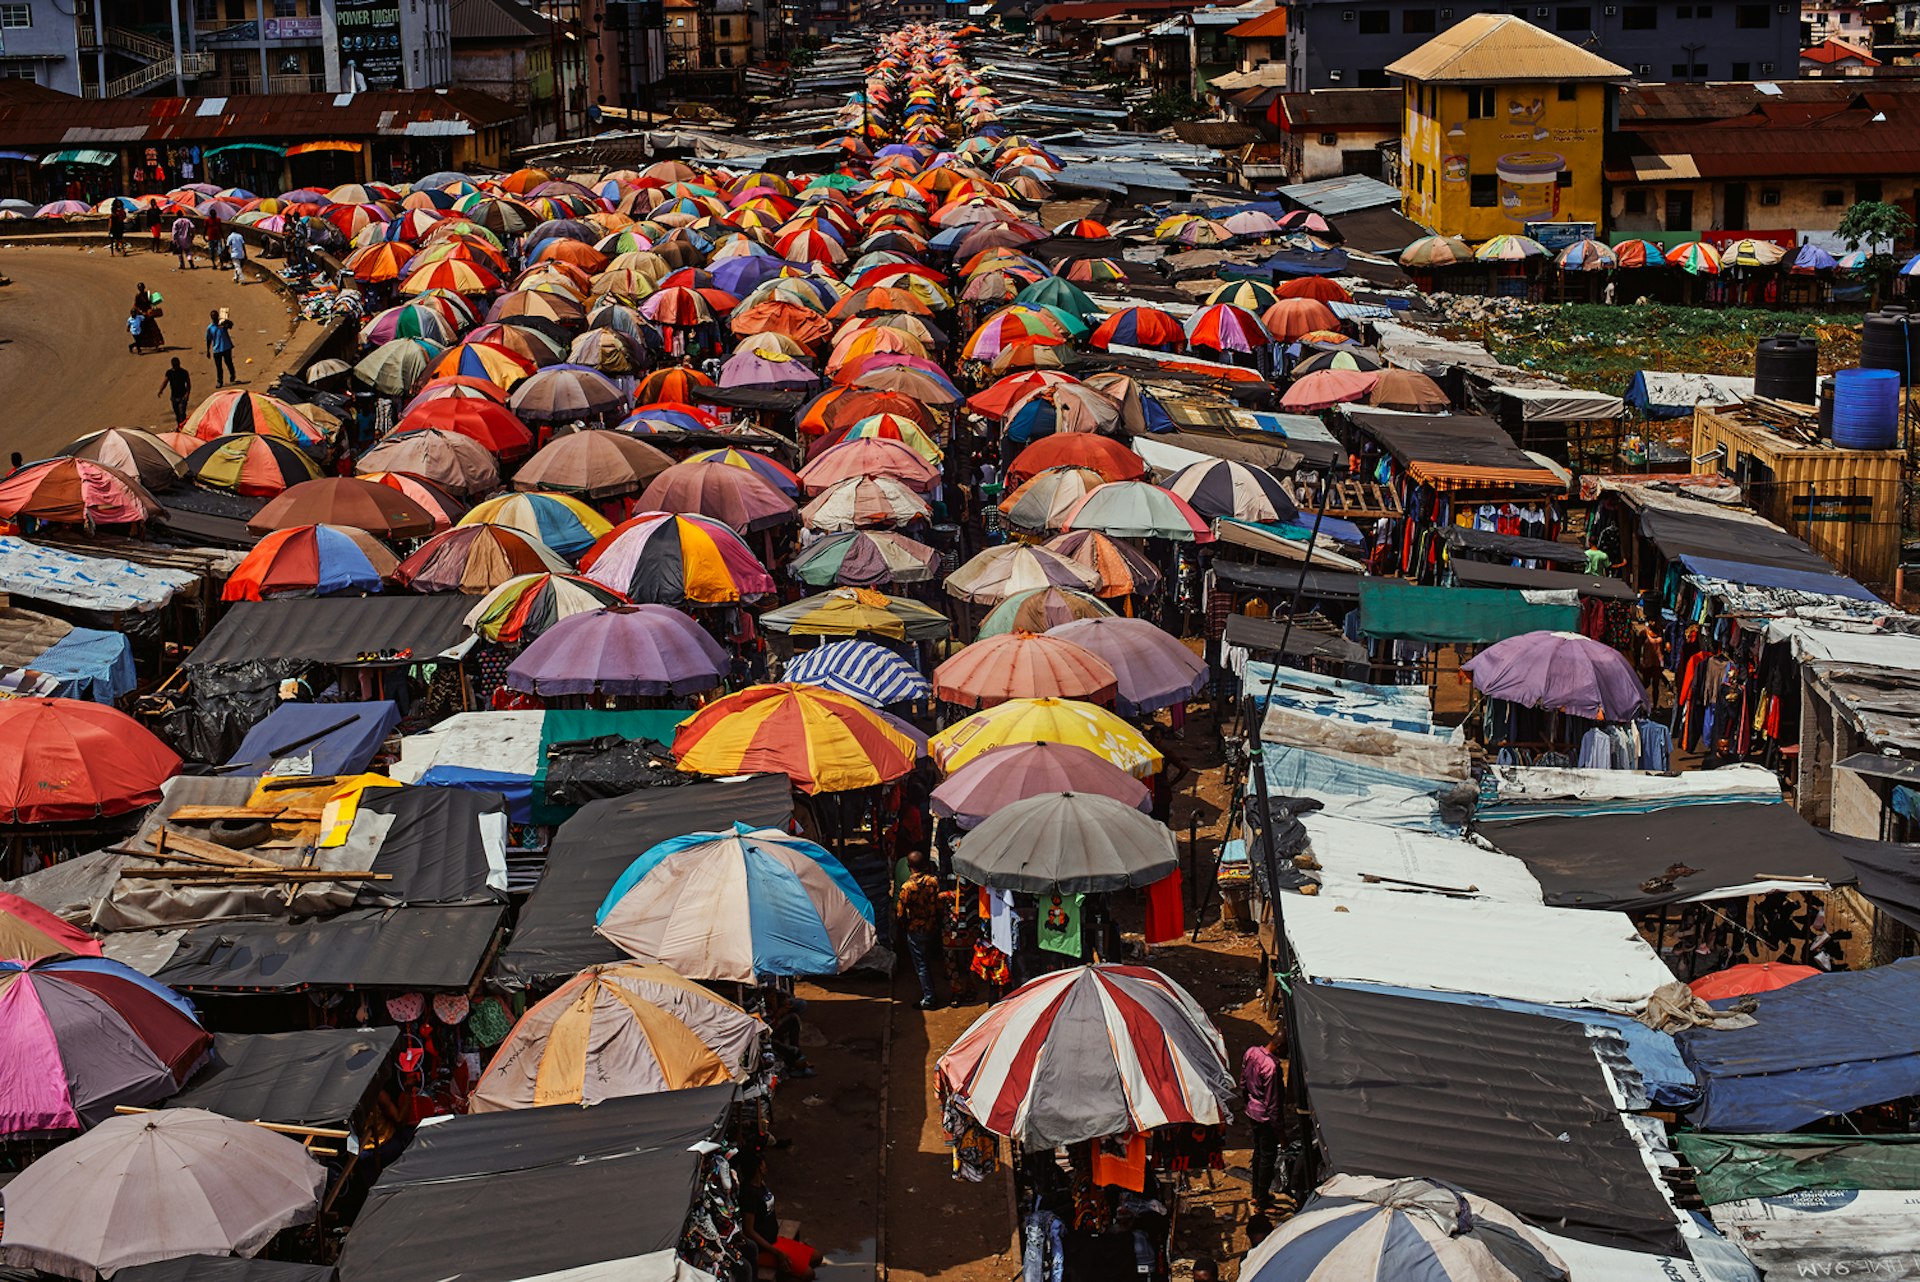 Hundreds of brightly colored umbrellas provide shade to shoppers at a busy market place